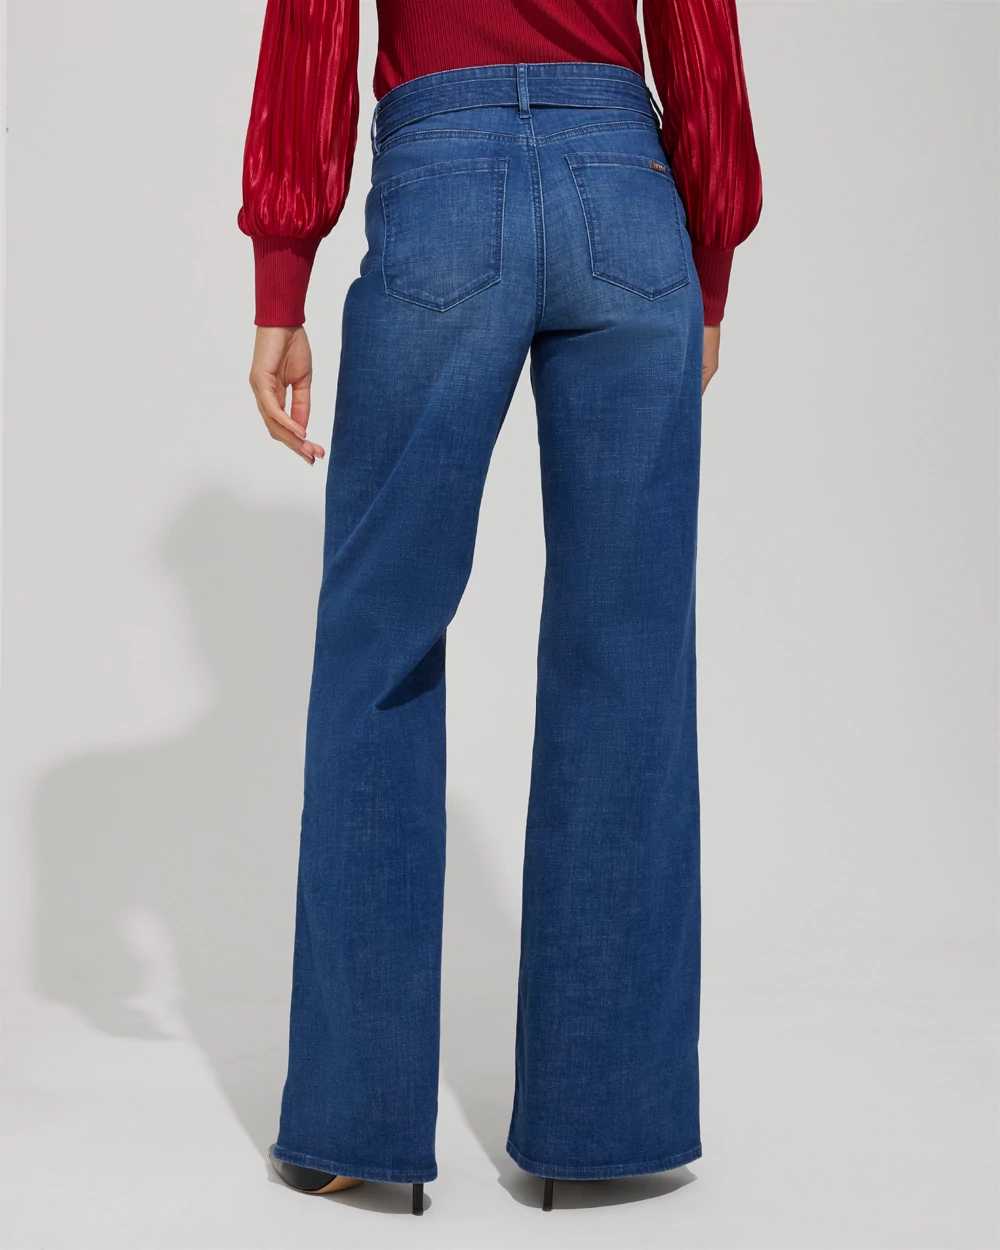 Outlet WHBM Belted High Rise Wide Leg Jeans click to view larger image.